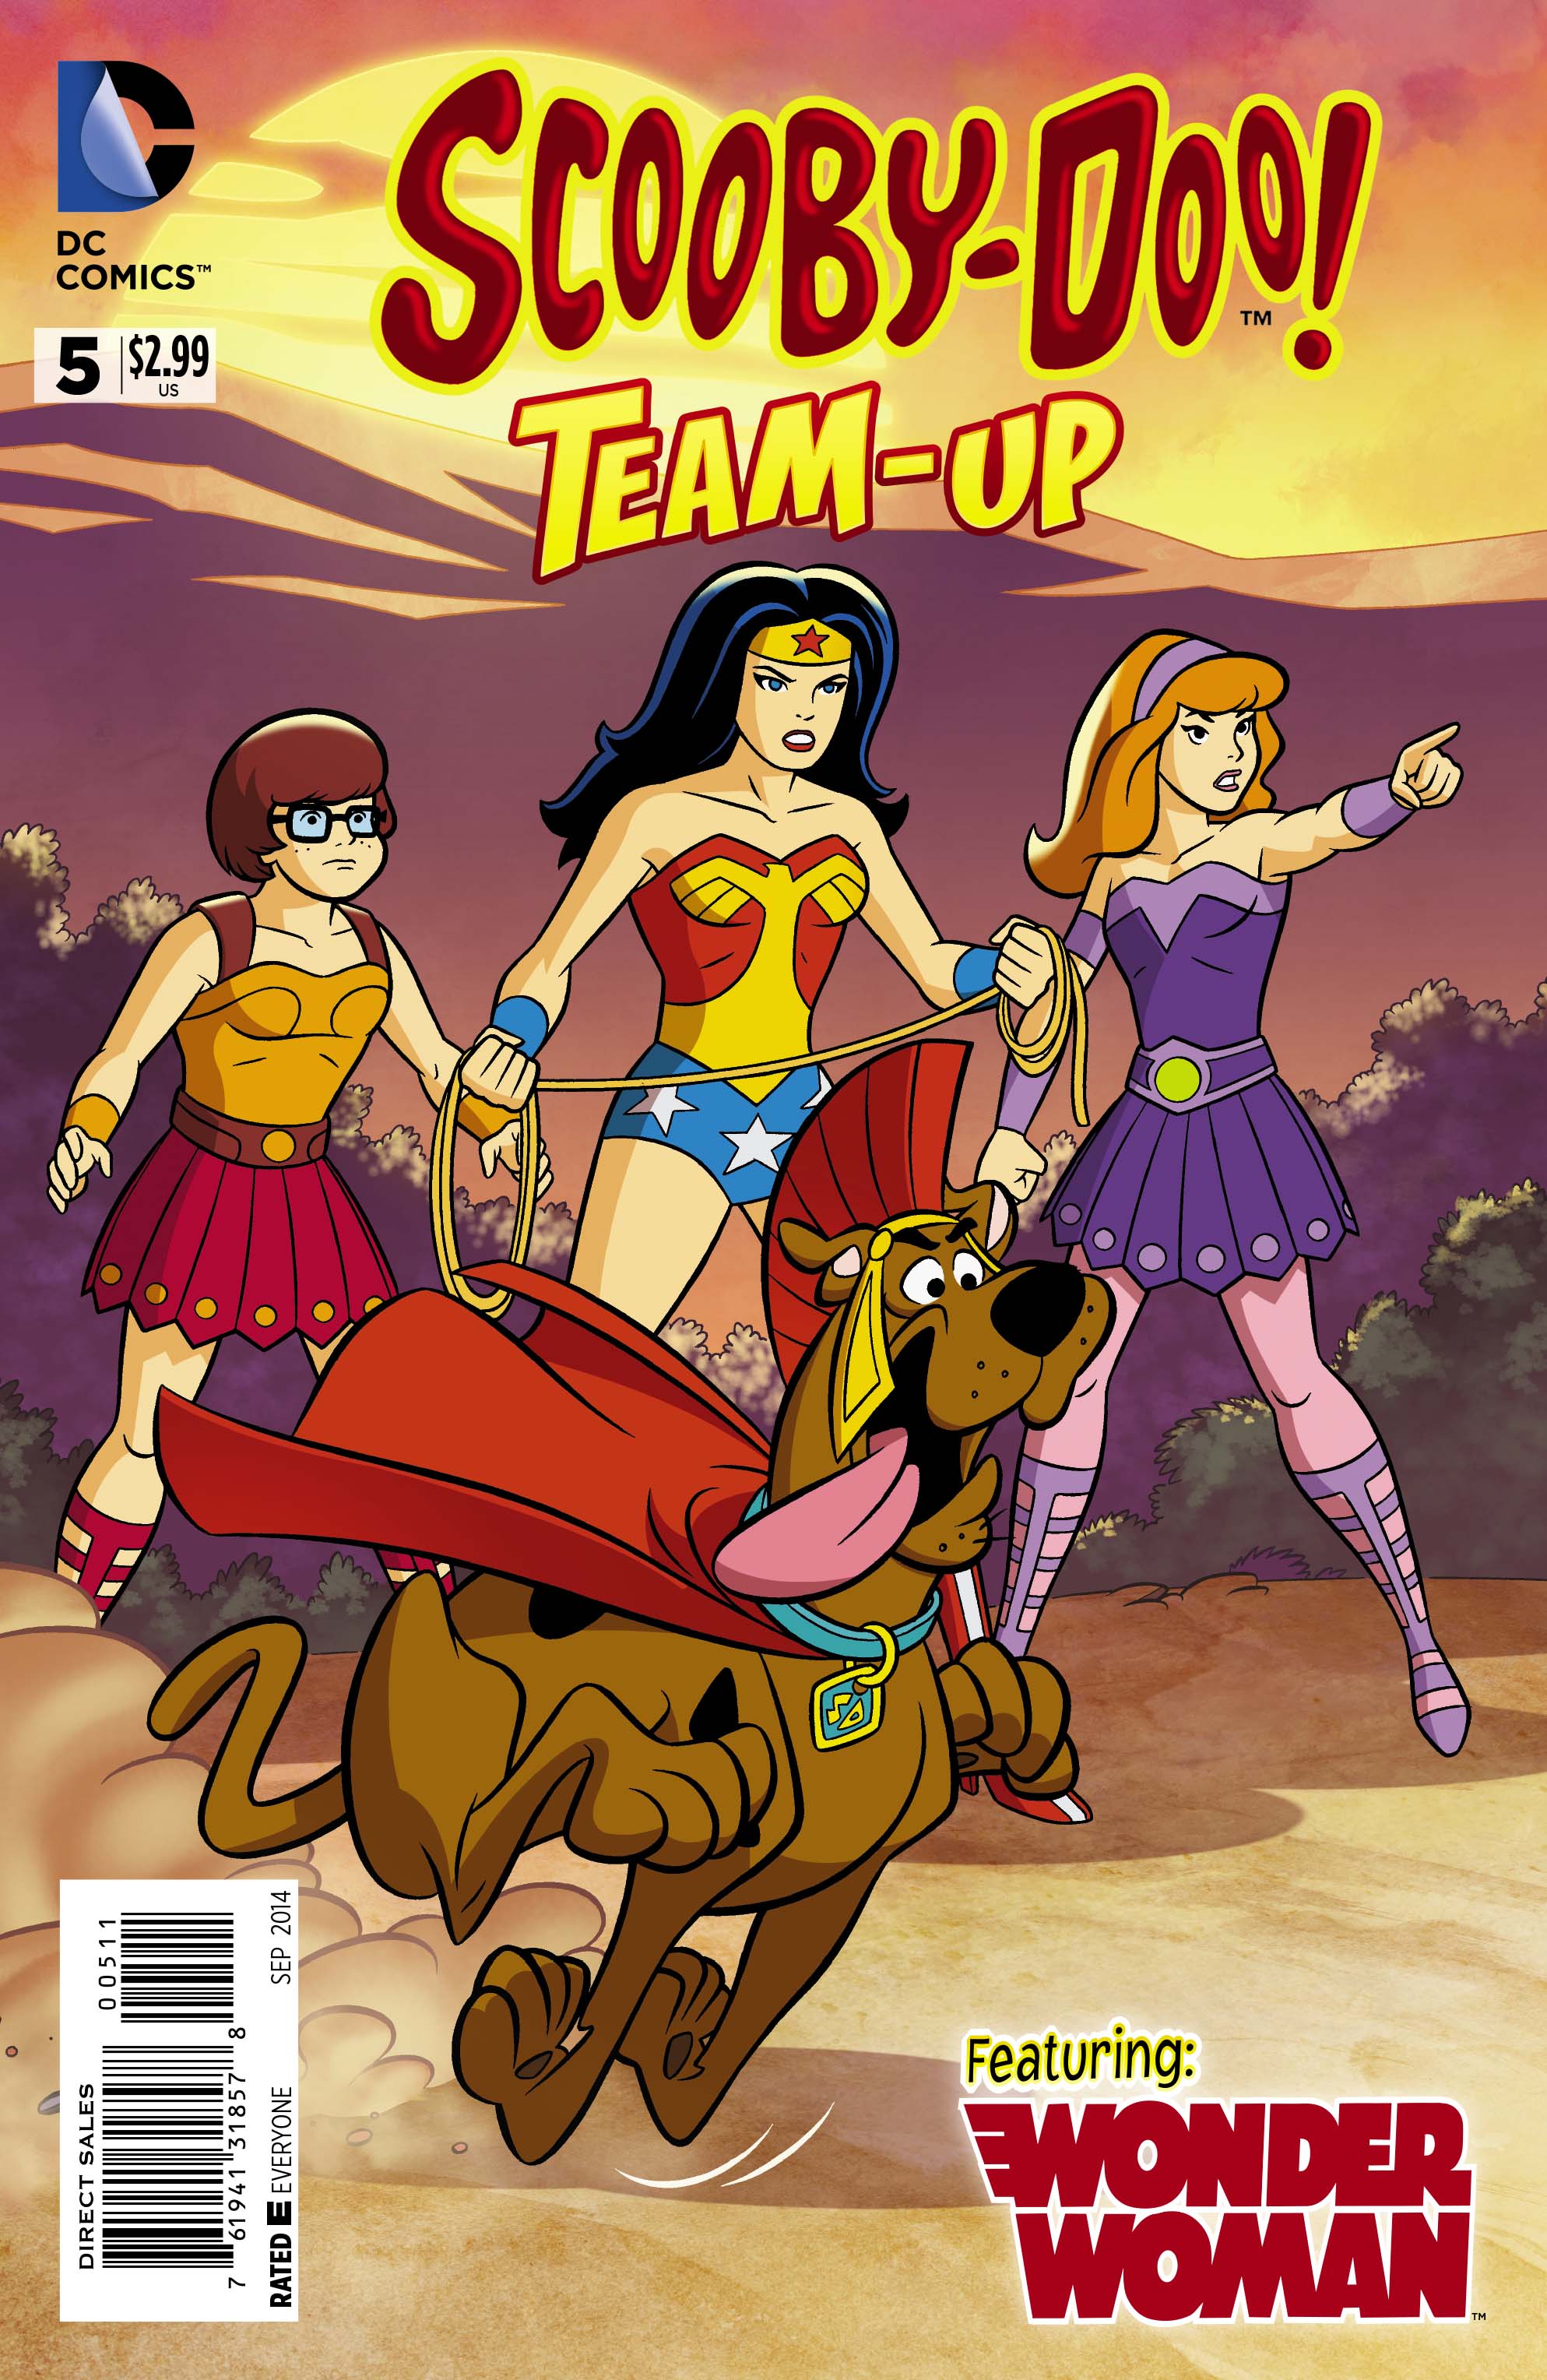 The gang teams up with Wonder Woman in Scooby Doo Team Up #9